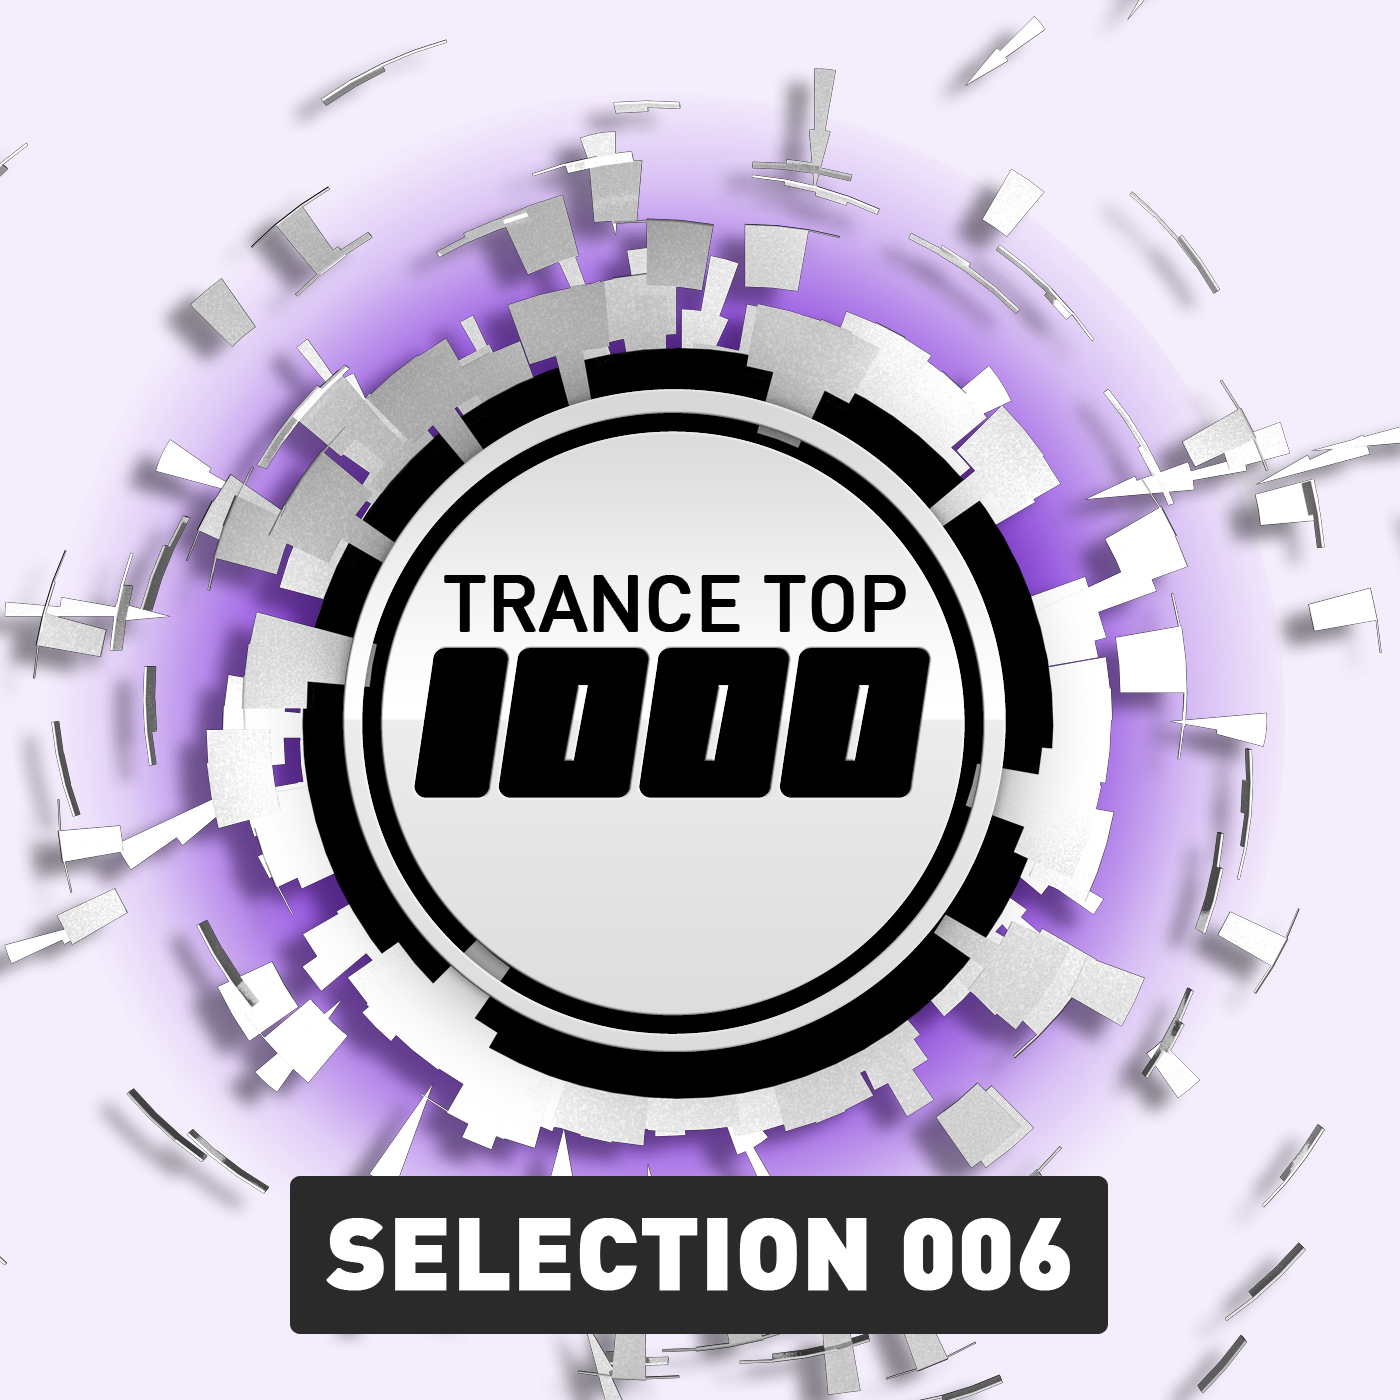 Trance Top 1000 - Selection 006